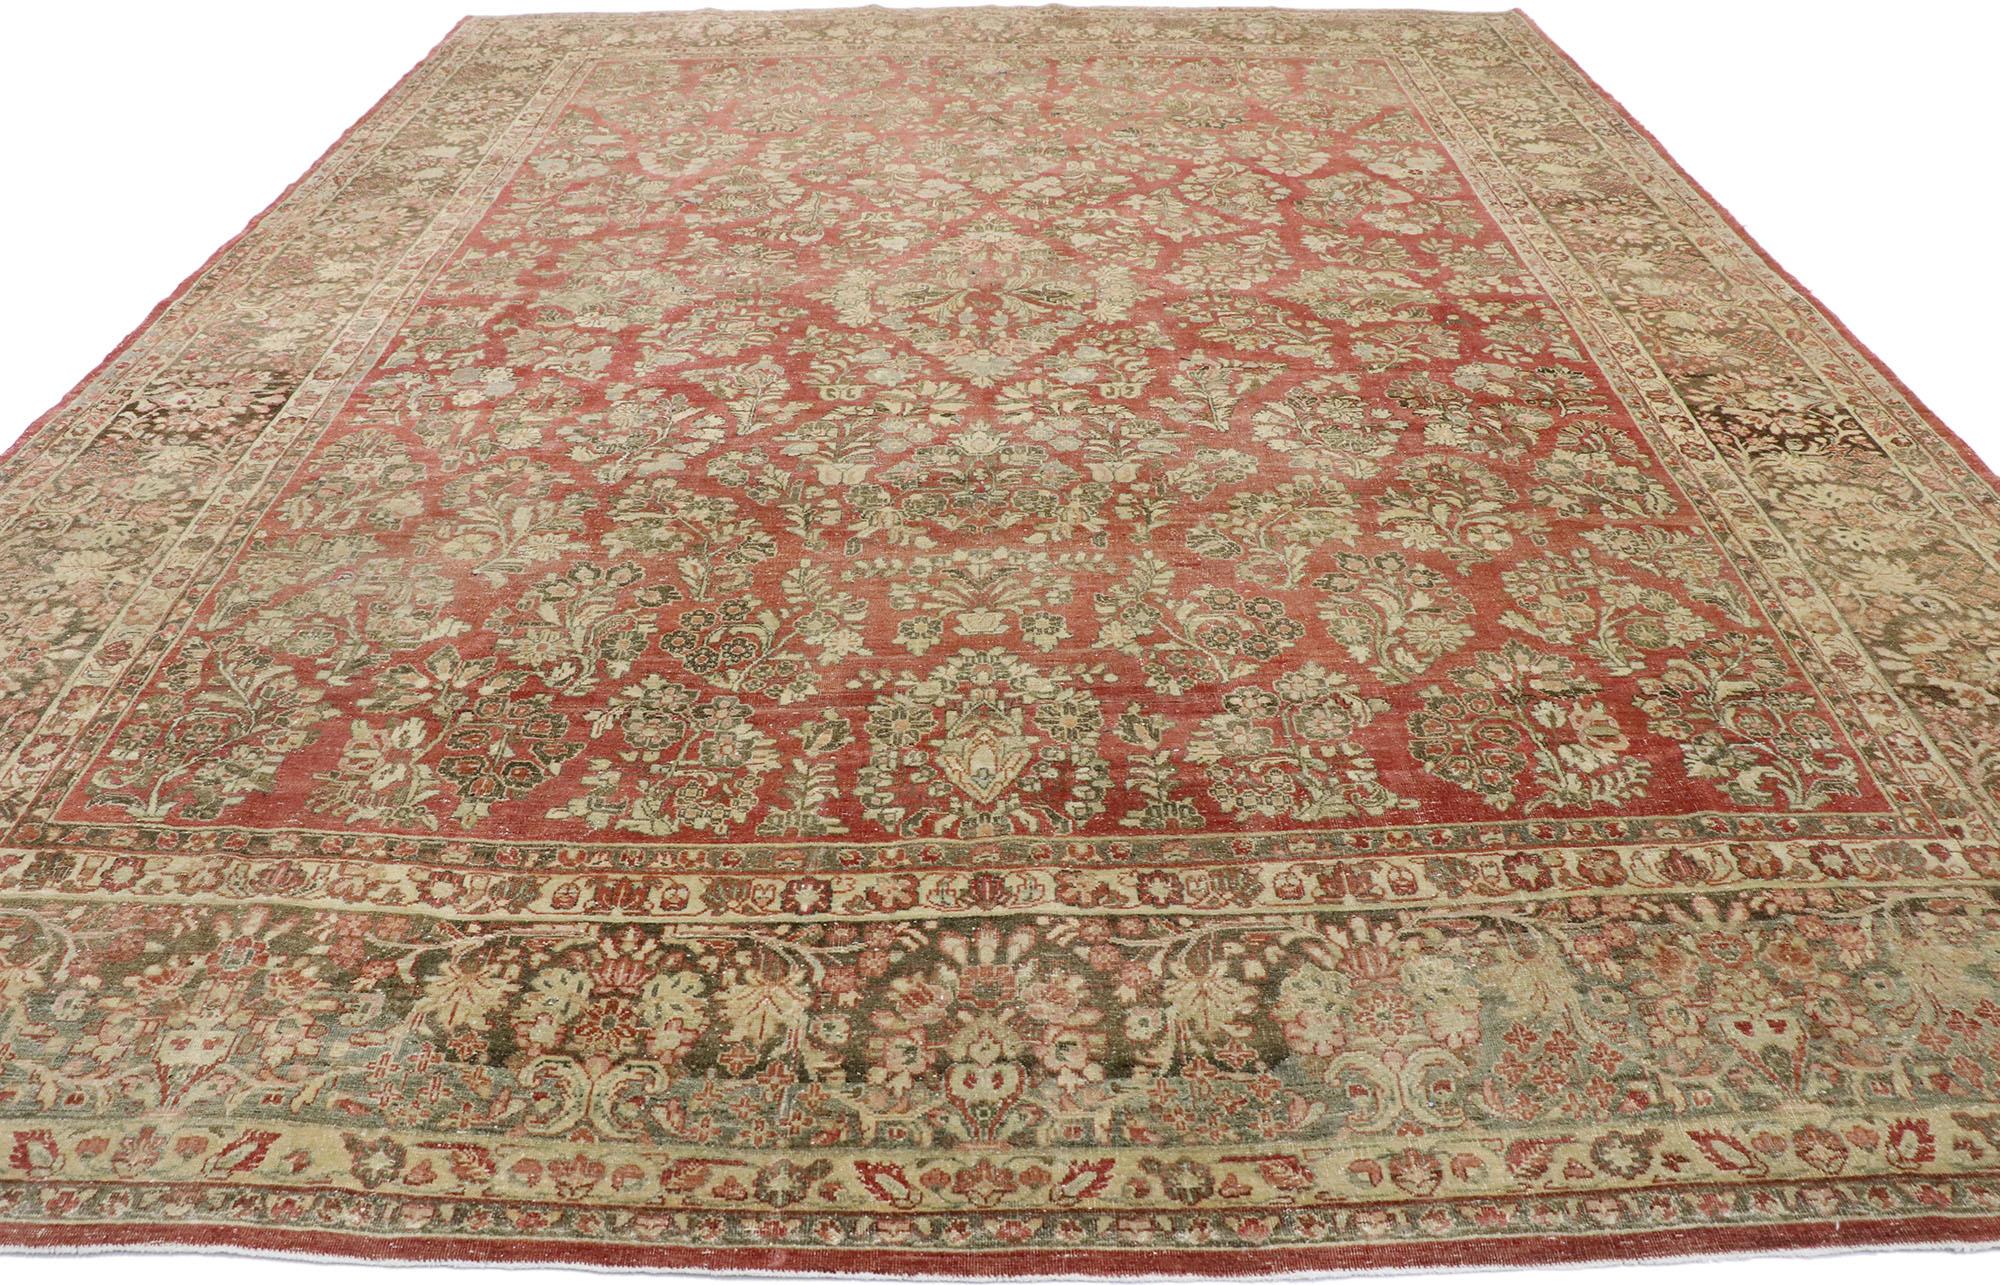 Sarouk Farahan Distressed Antique Persian Sarouk Rug with Rustic American Traditional Style For Sale